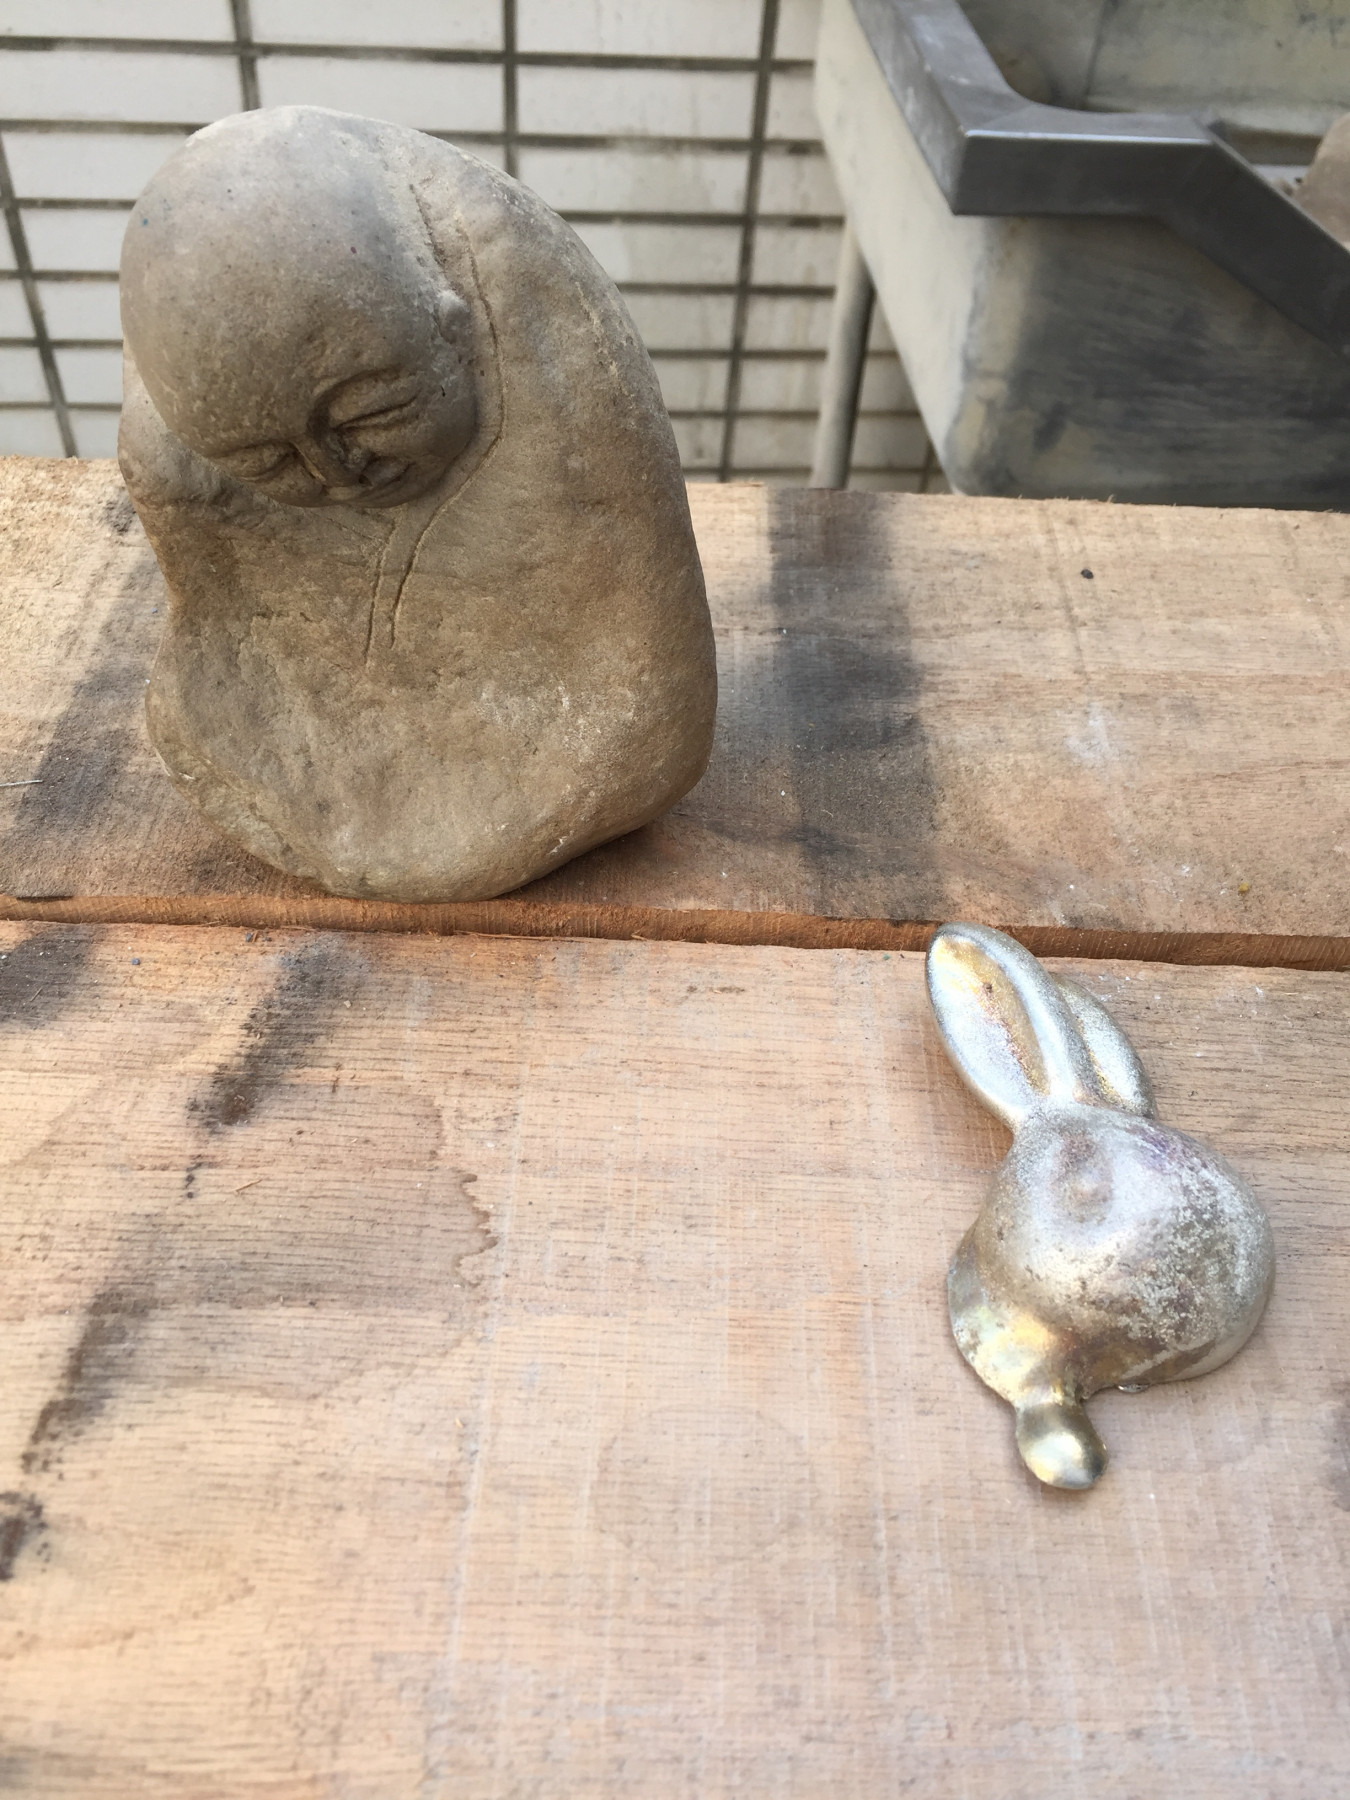 Image of a stone staute made by A-Fu and a pewter bunny by David Clarke. These become material for the other artist.